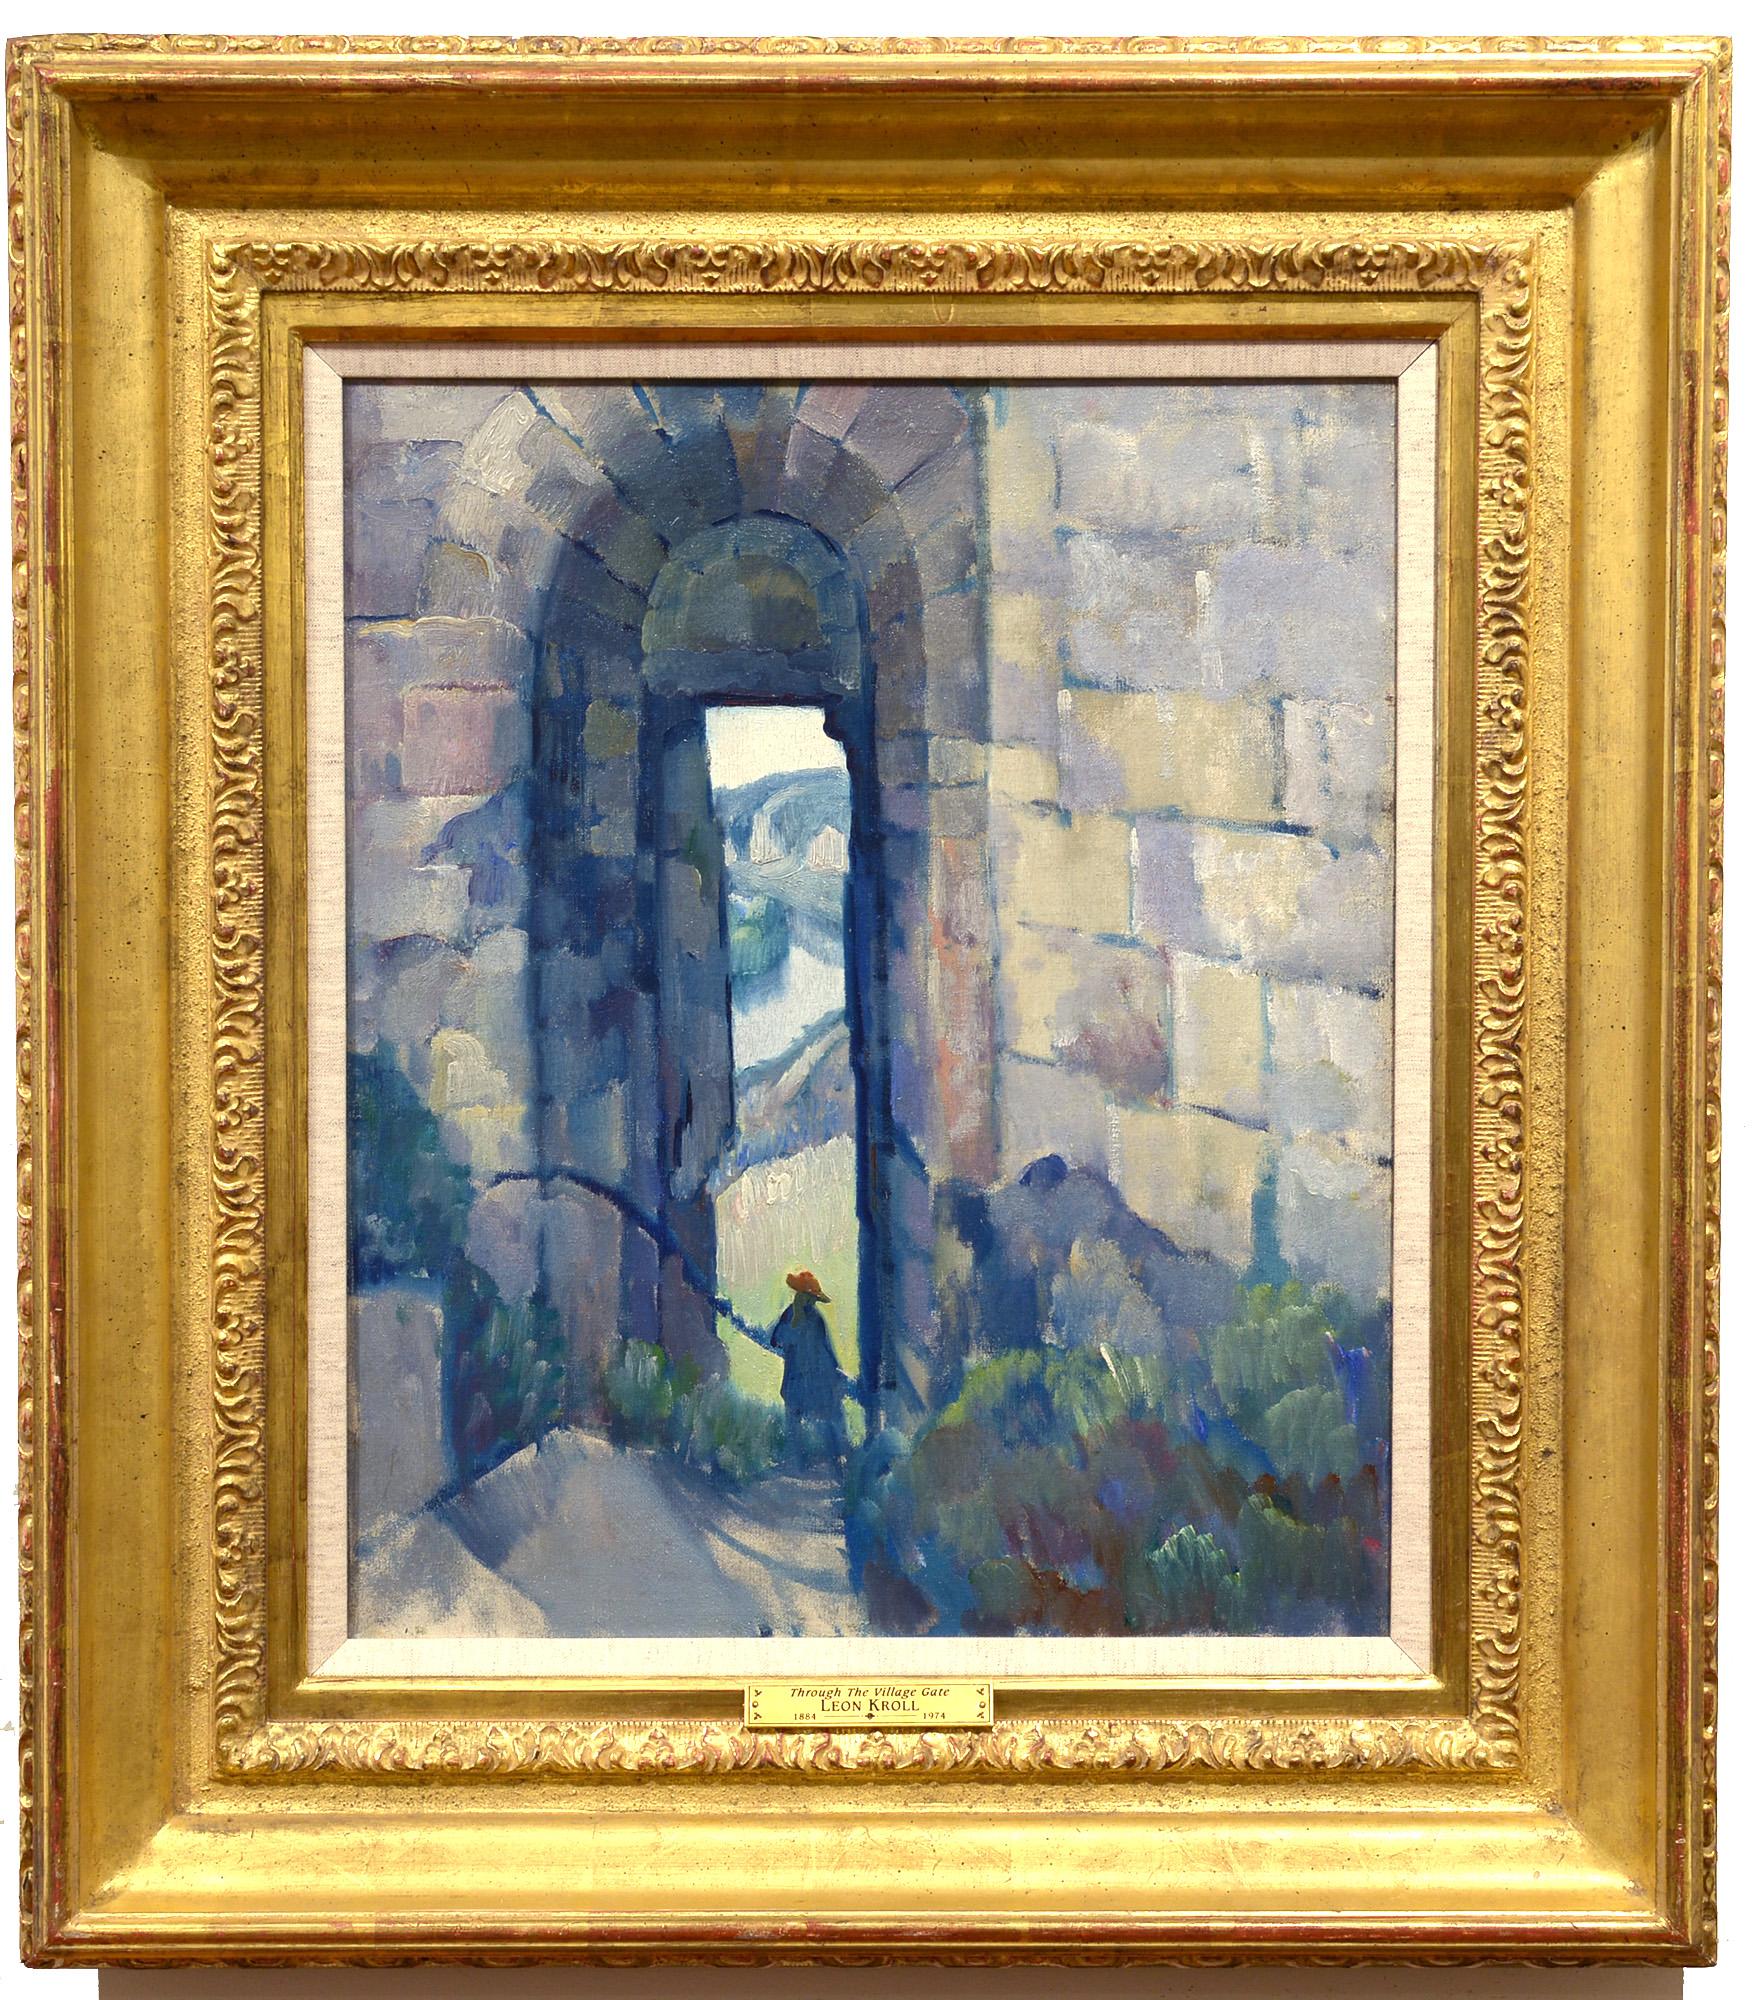 Through the Village Gate - Painting by Leon Kroll